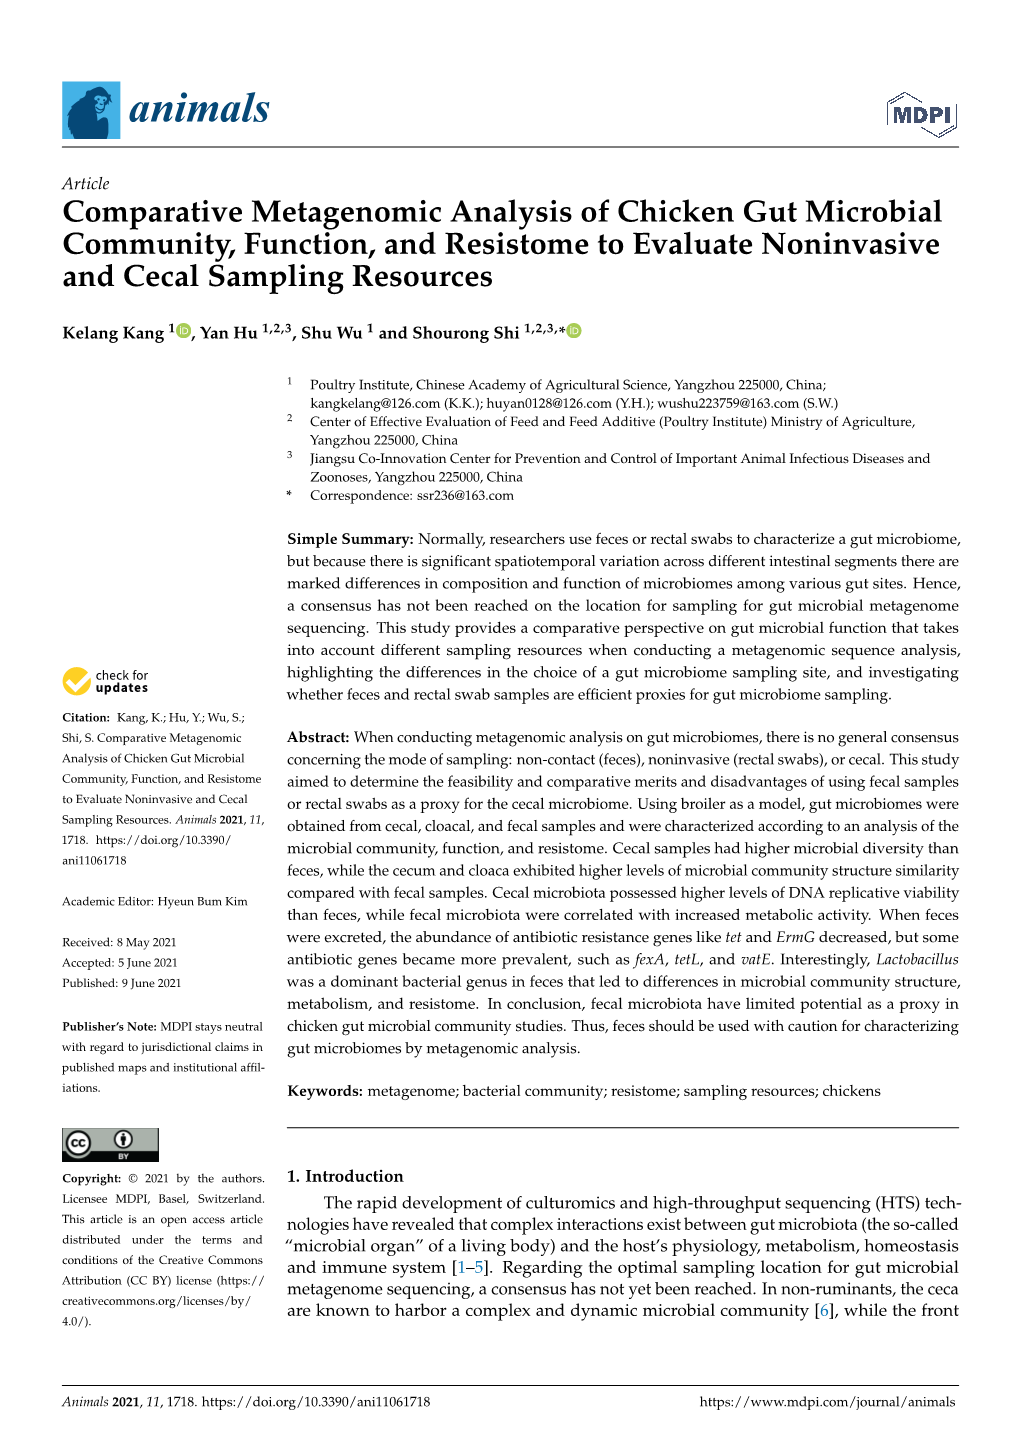 Comparative Metagenomic Analysis of Chicken Gut Microbial Community, Function, and Resistome to Evaluate Noninvasive and Cecal Sampling Resources